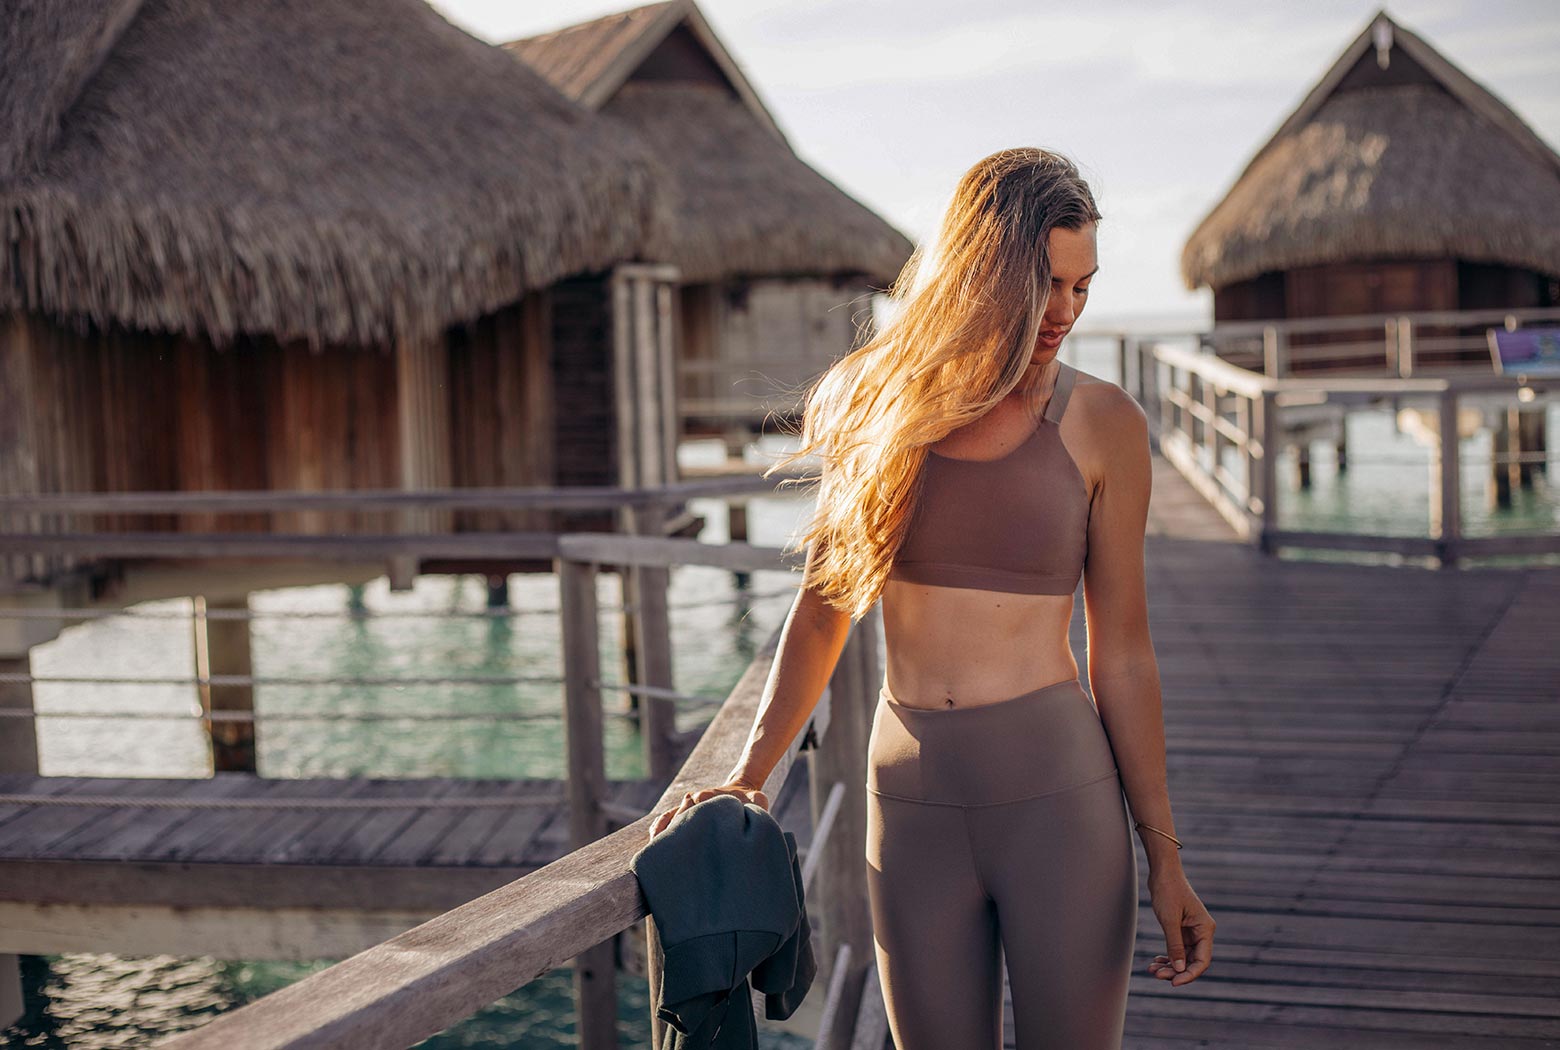 Rachel Moore standing on a polynesian dock in front of tiki huts, wearing a beige sports bra and leggings combo